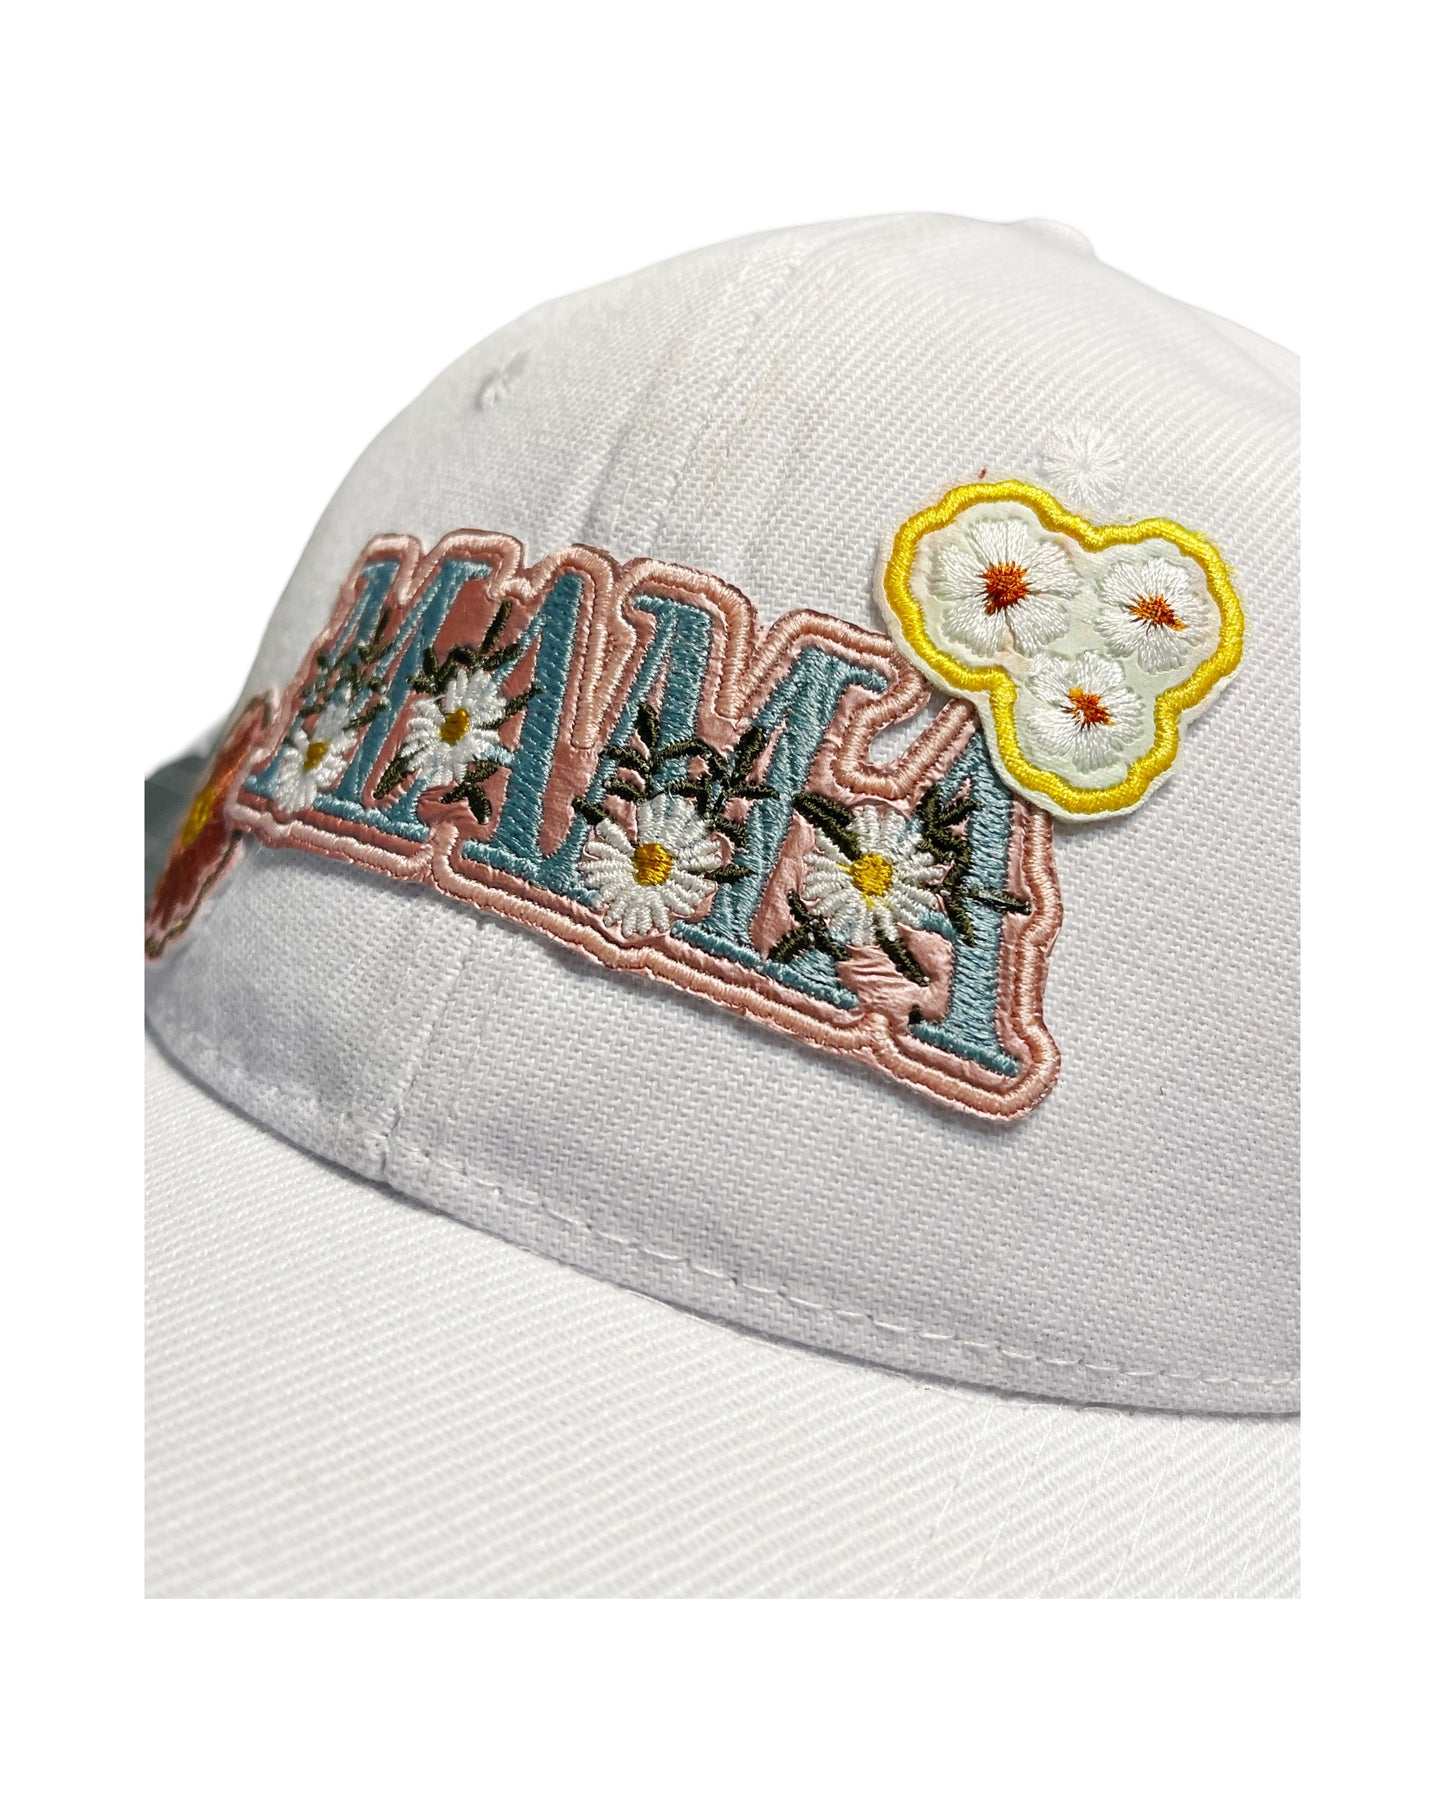 "White Baseball Hat with Embroidered 'Mama' and Flower Patches"